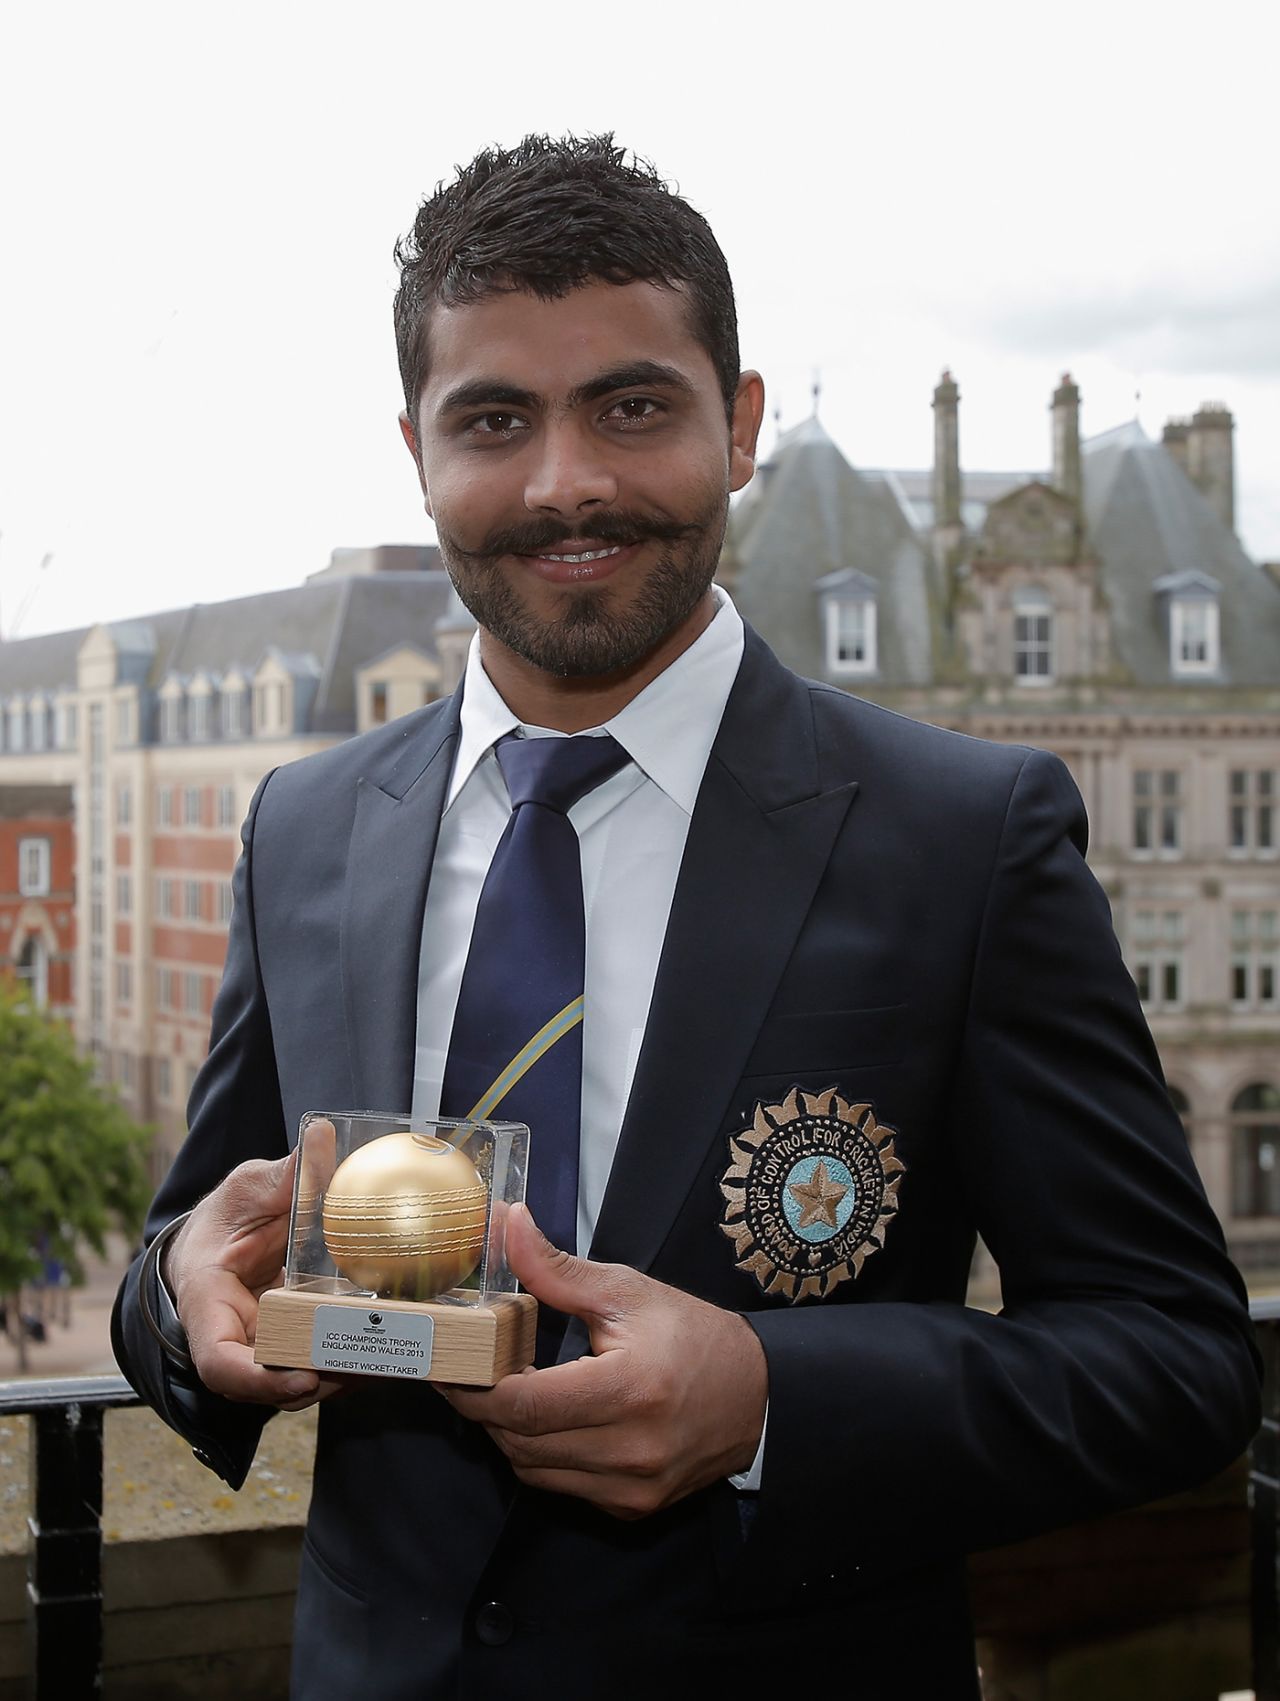 Ravindra Jadeja poses with the trophy awarded to the leading wicket-taker at the end of the tournament, Champions Trophy, Birmingham, June 24, 2013